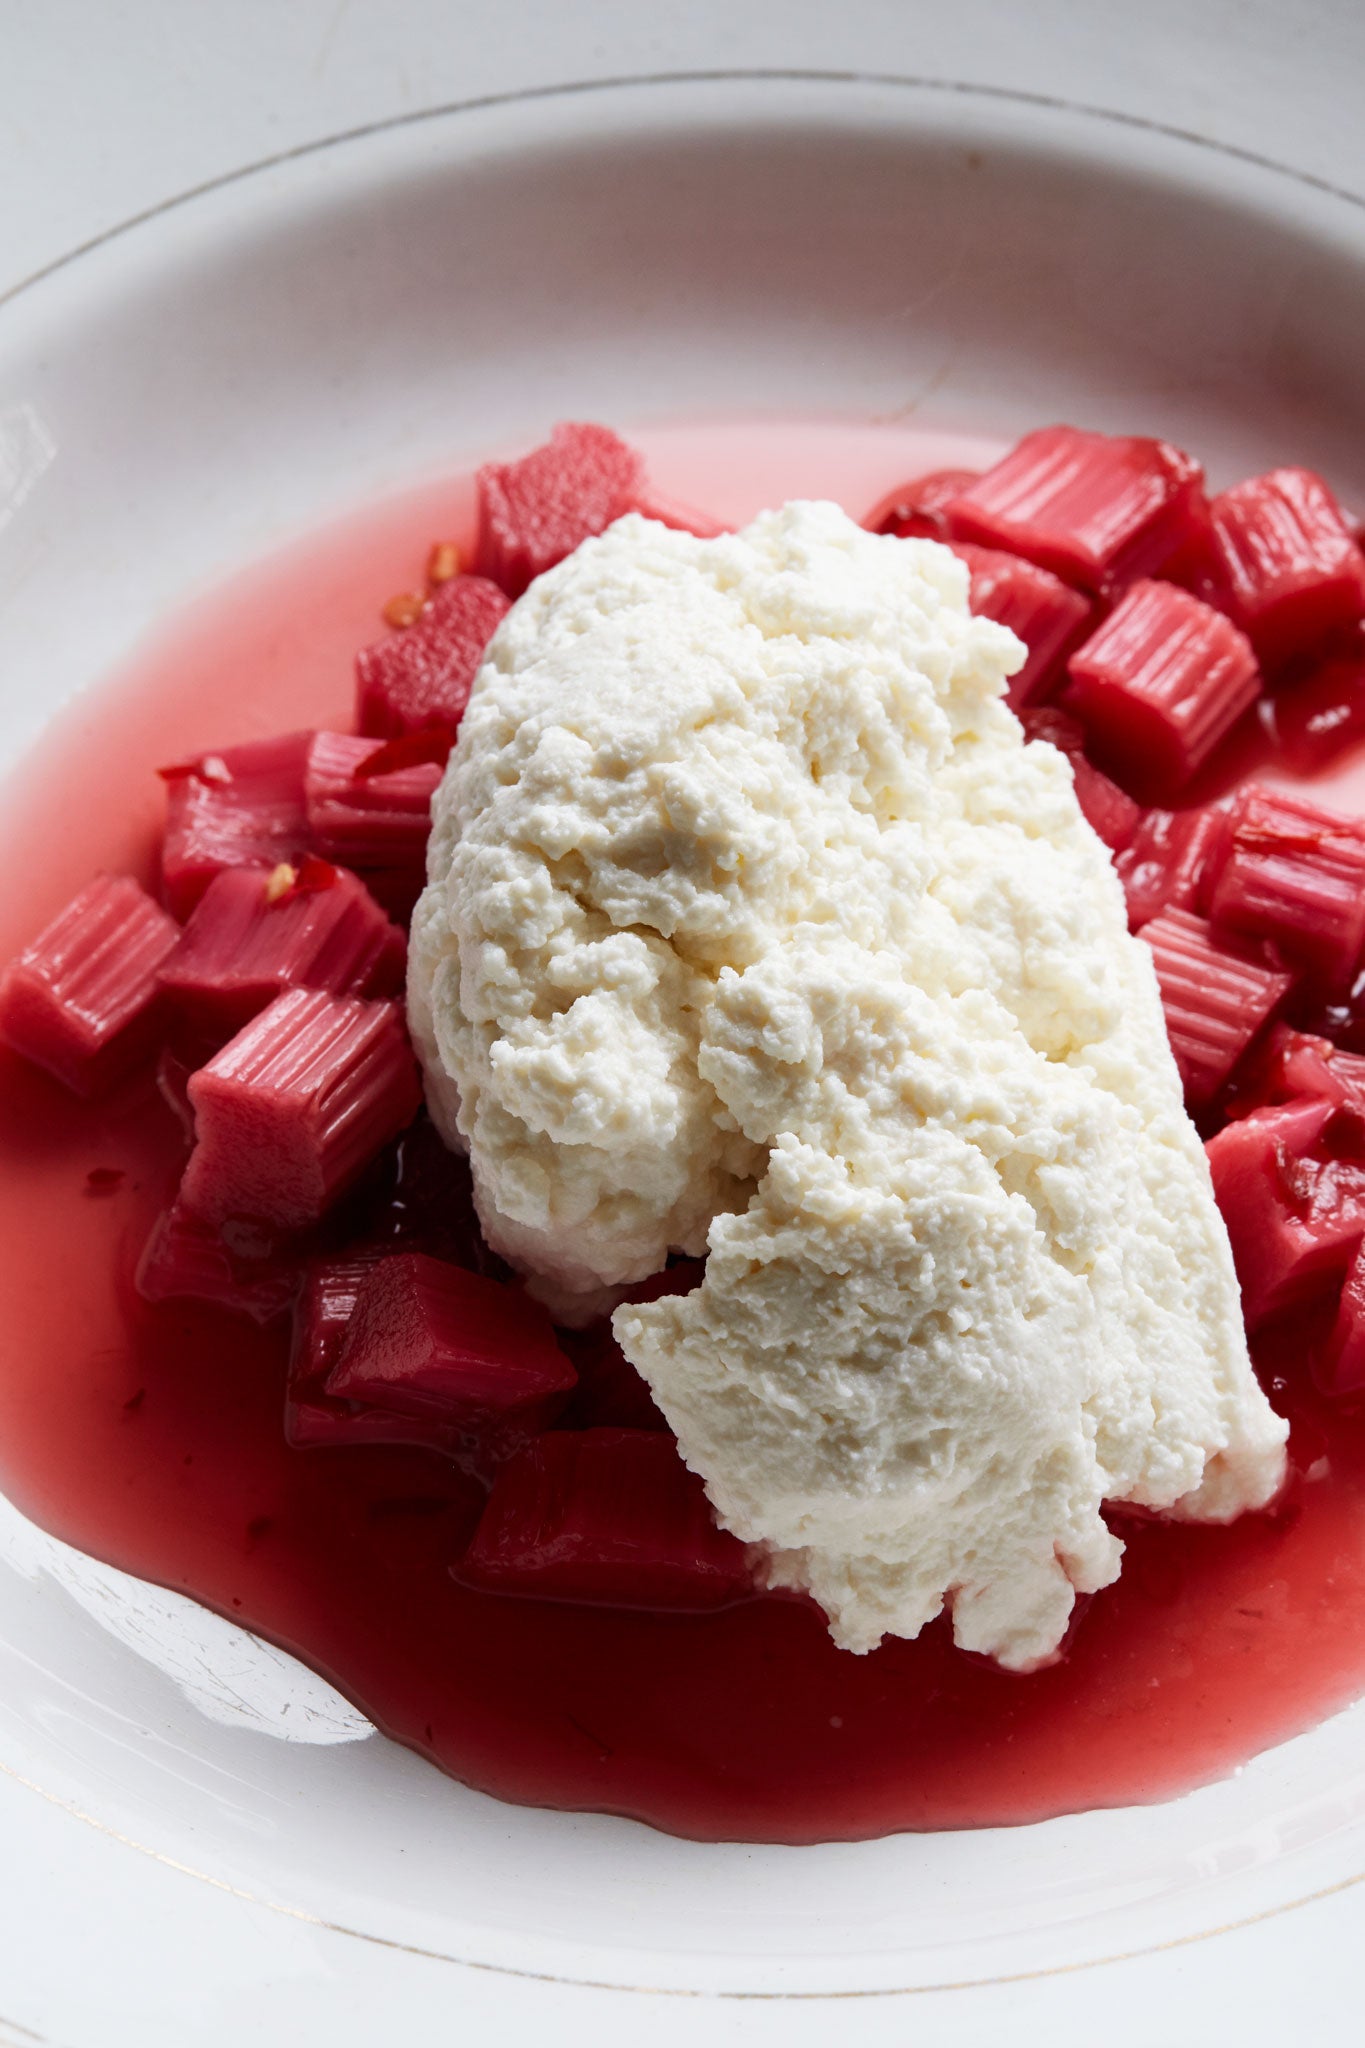 Ricotta with spiced rhubarb is a simple dessert to execute for a dinner party